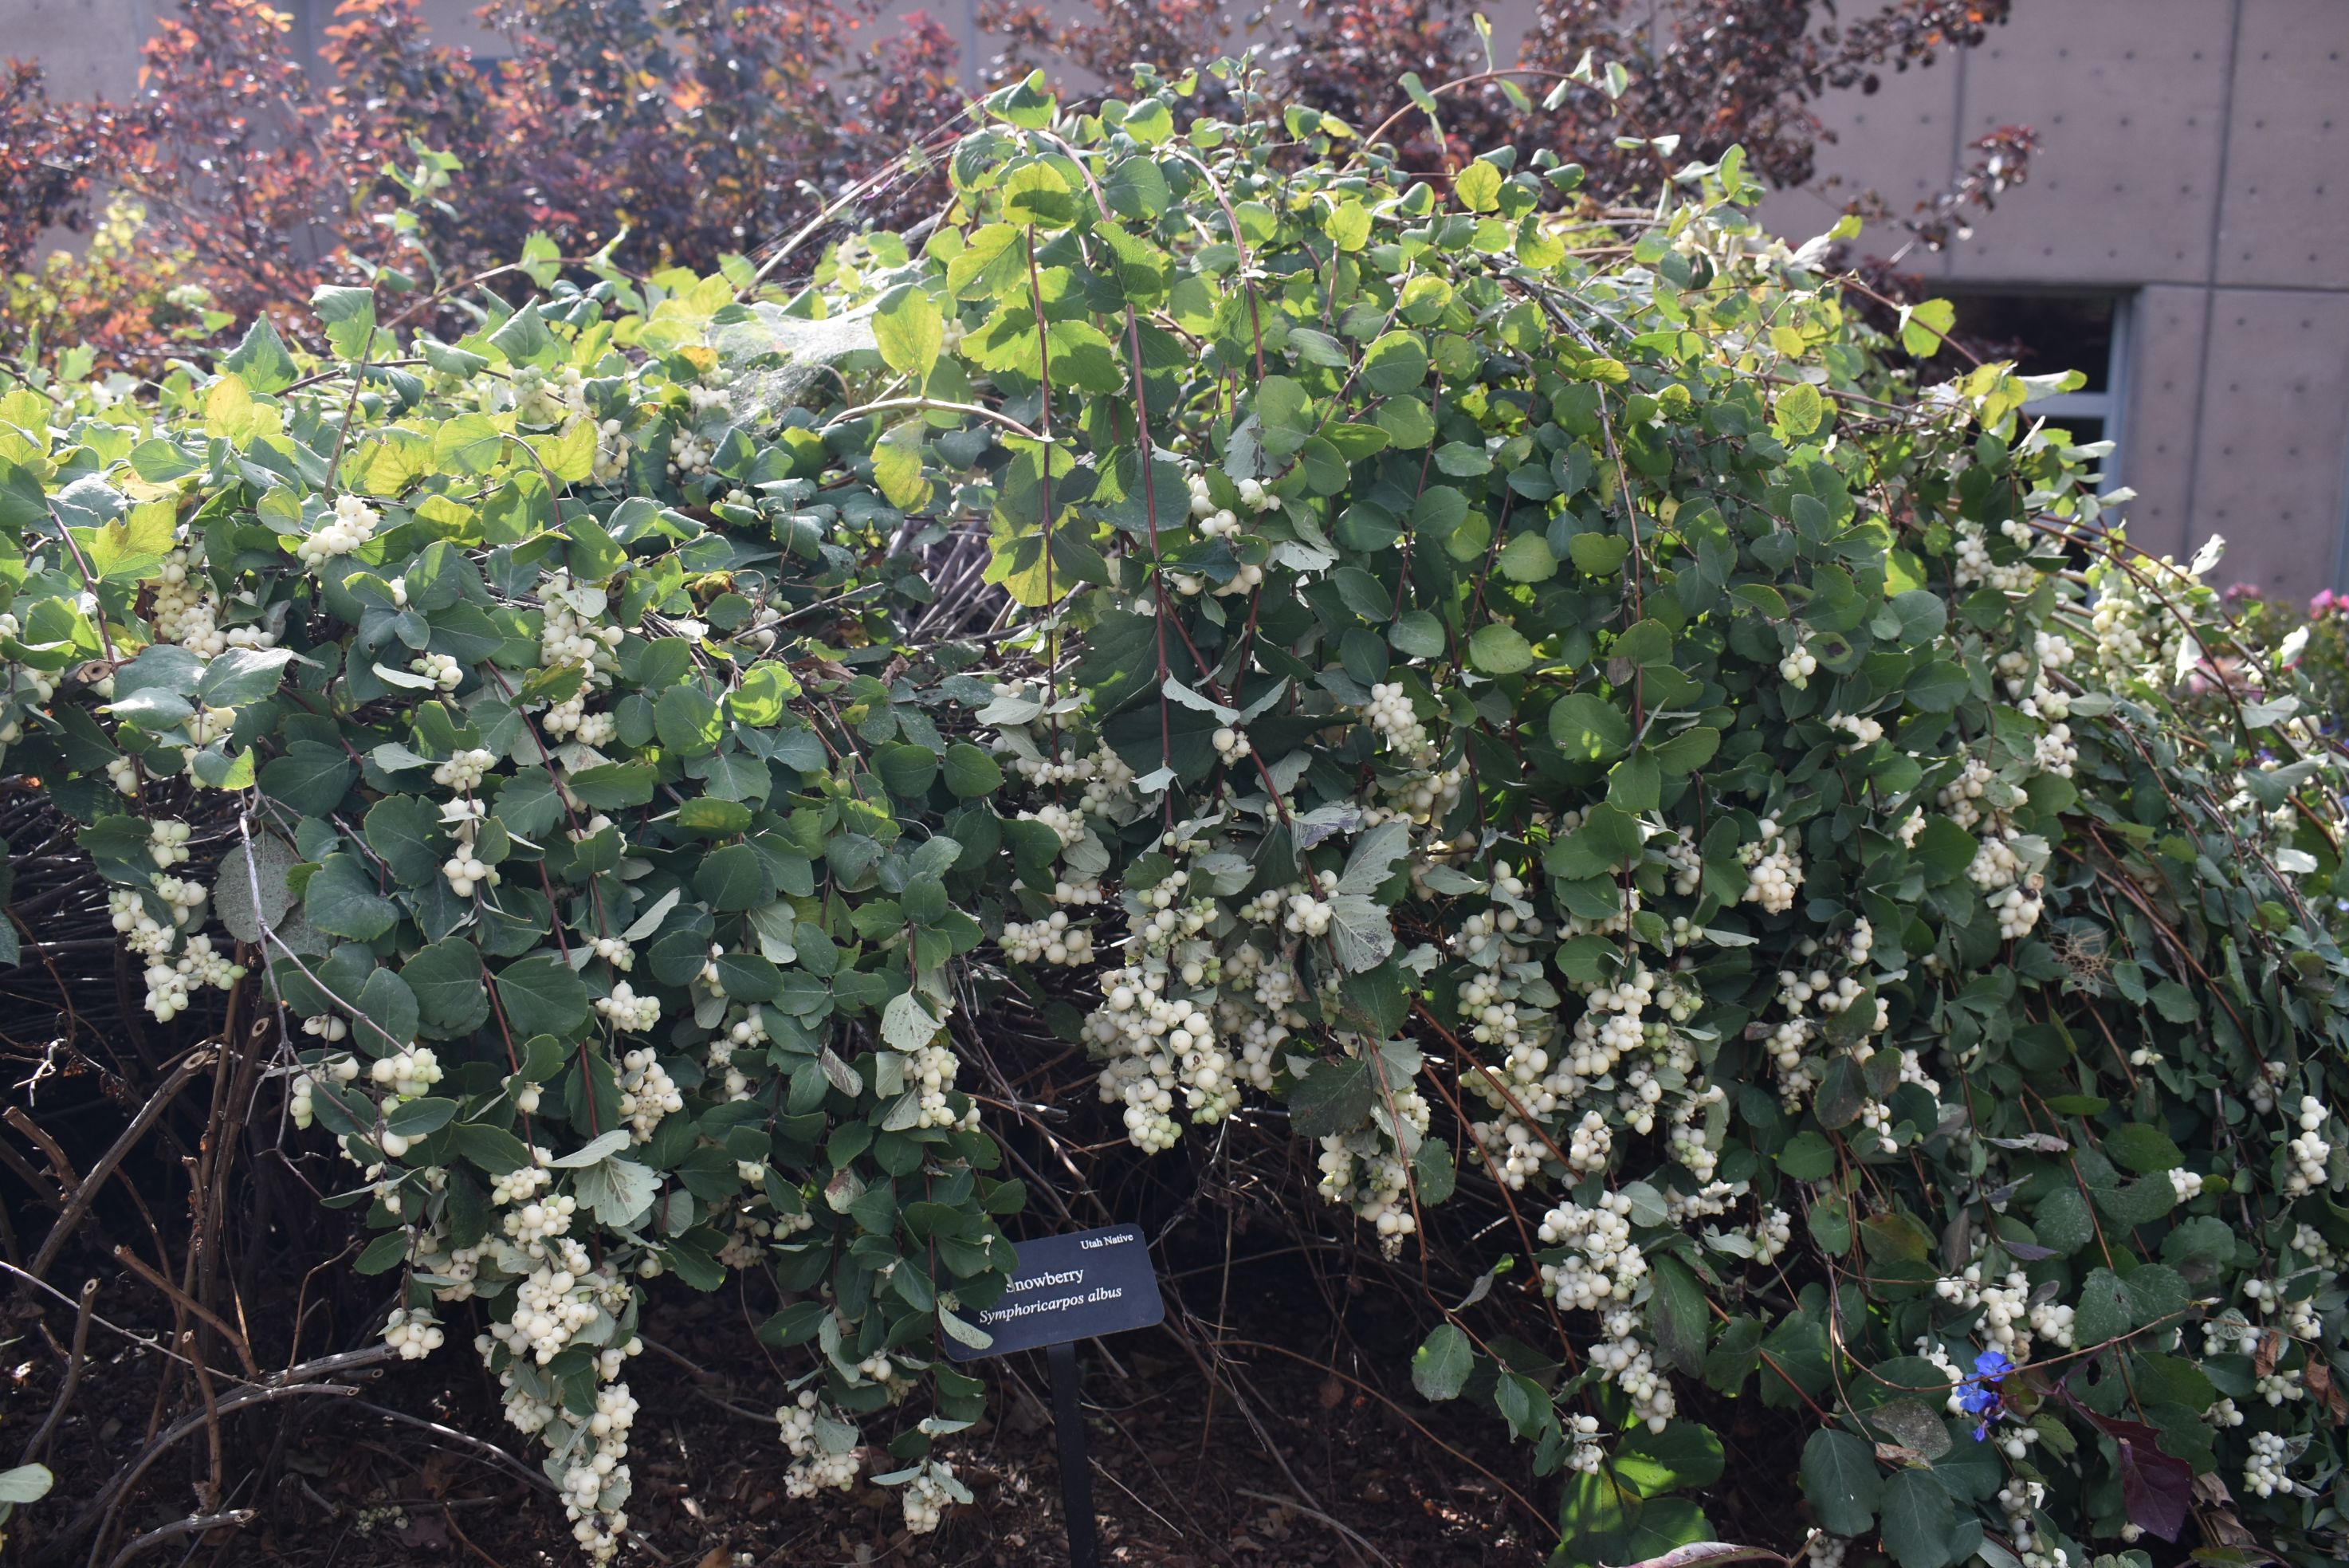 How to Grow and Care for Snowberry Bush